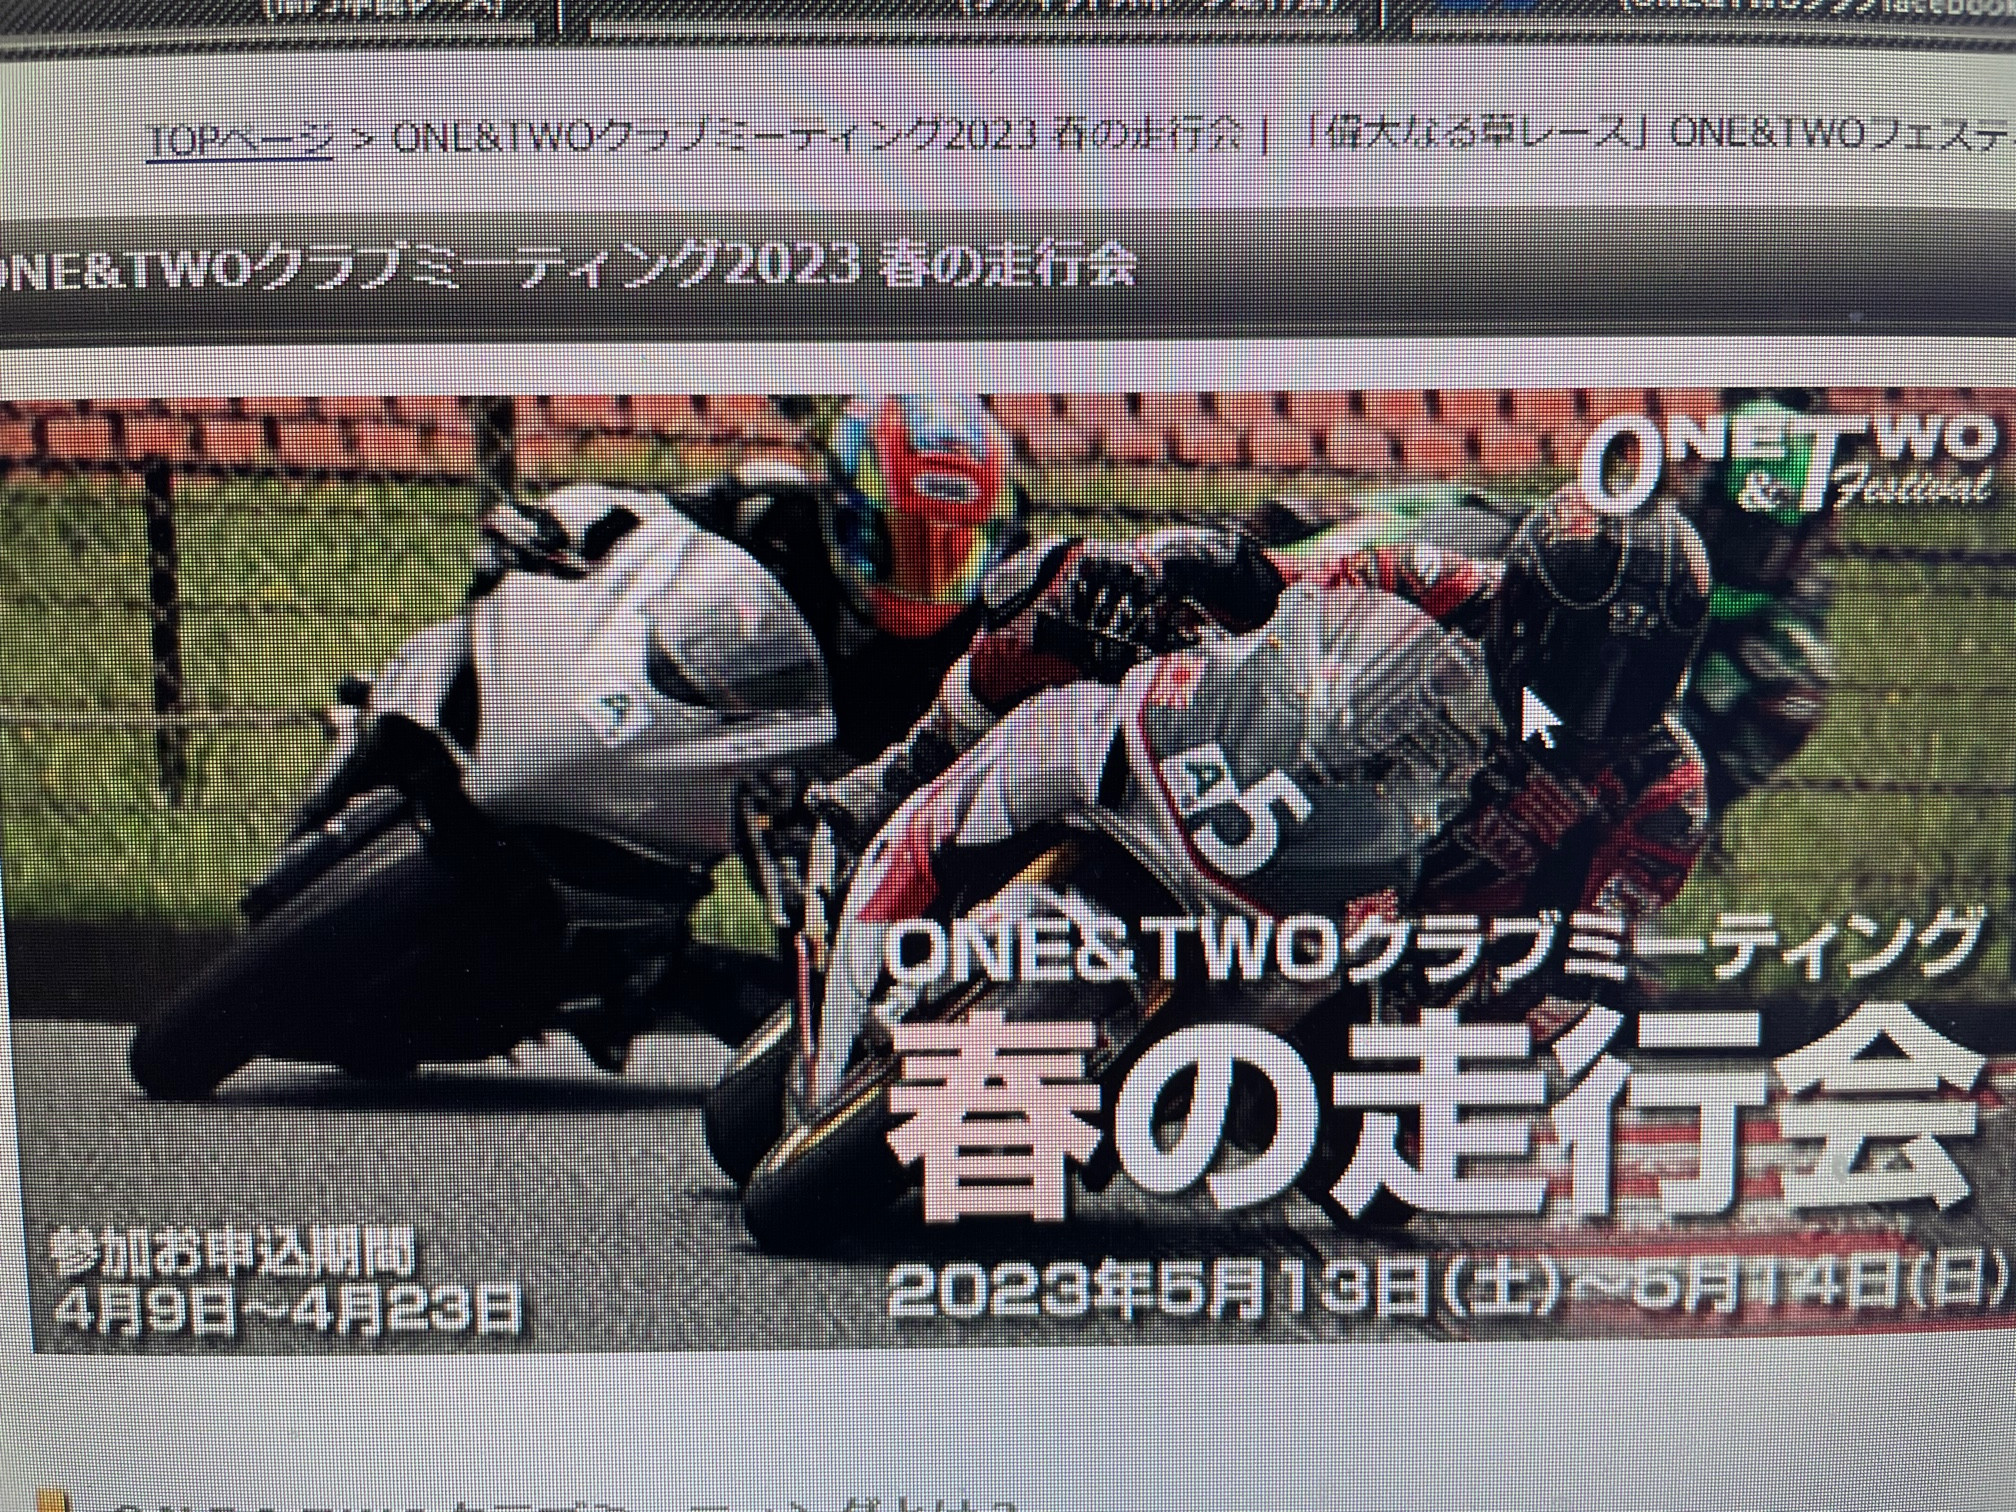 ONE＆TWOクラブ　春の走行会　エントリー受付開始！